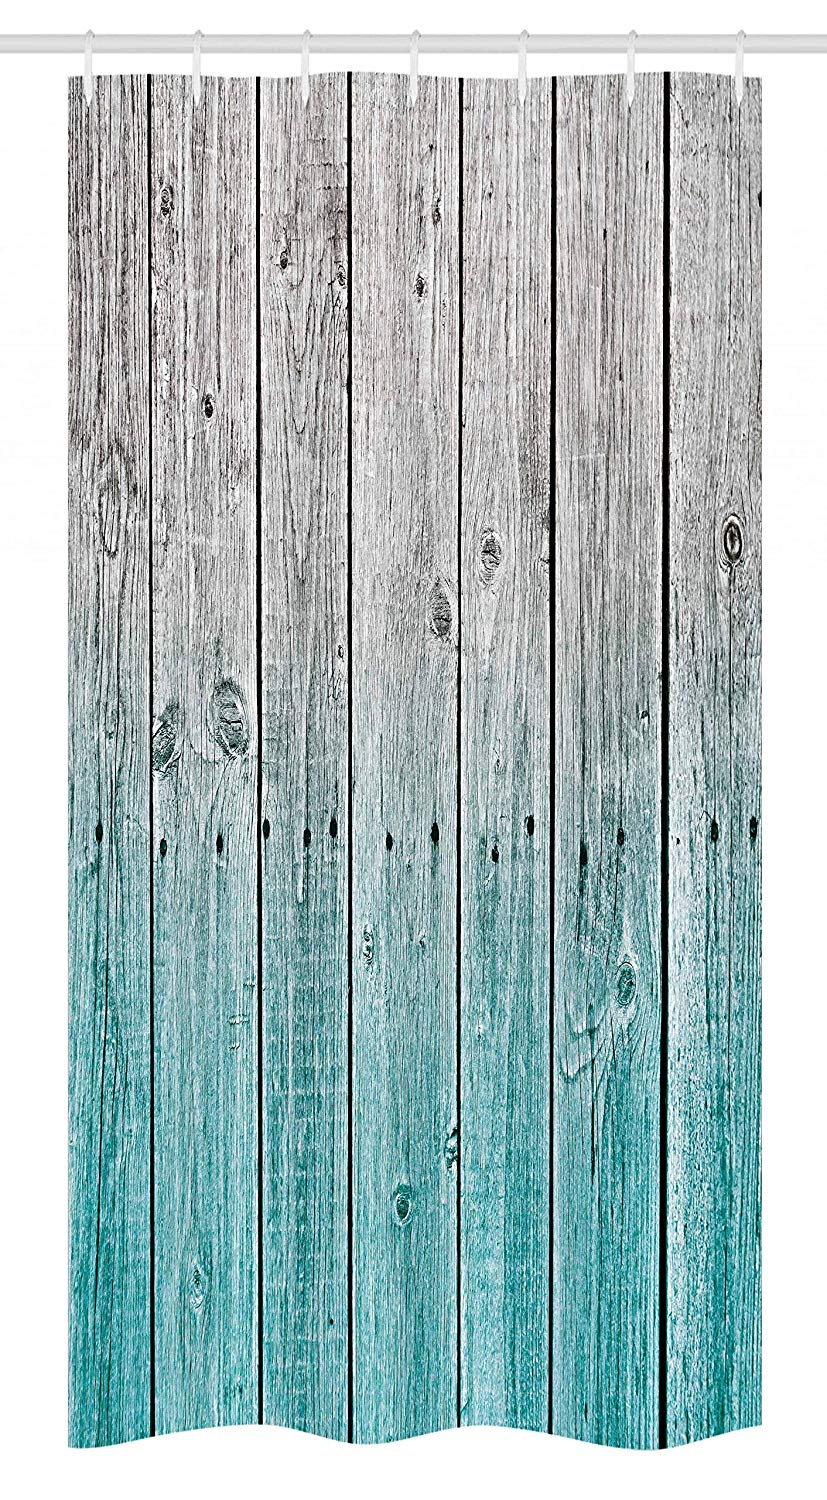 Ambesonne Rustic Stall Shower Curtain, Wood Panels Background with Digital Tones Effect Country House Art Image, Fabric Bathroom Decor Set with Hooks, 36" X 72", Teal Grey